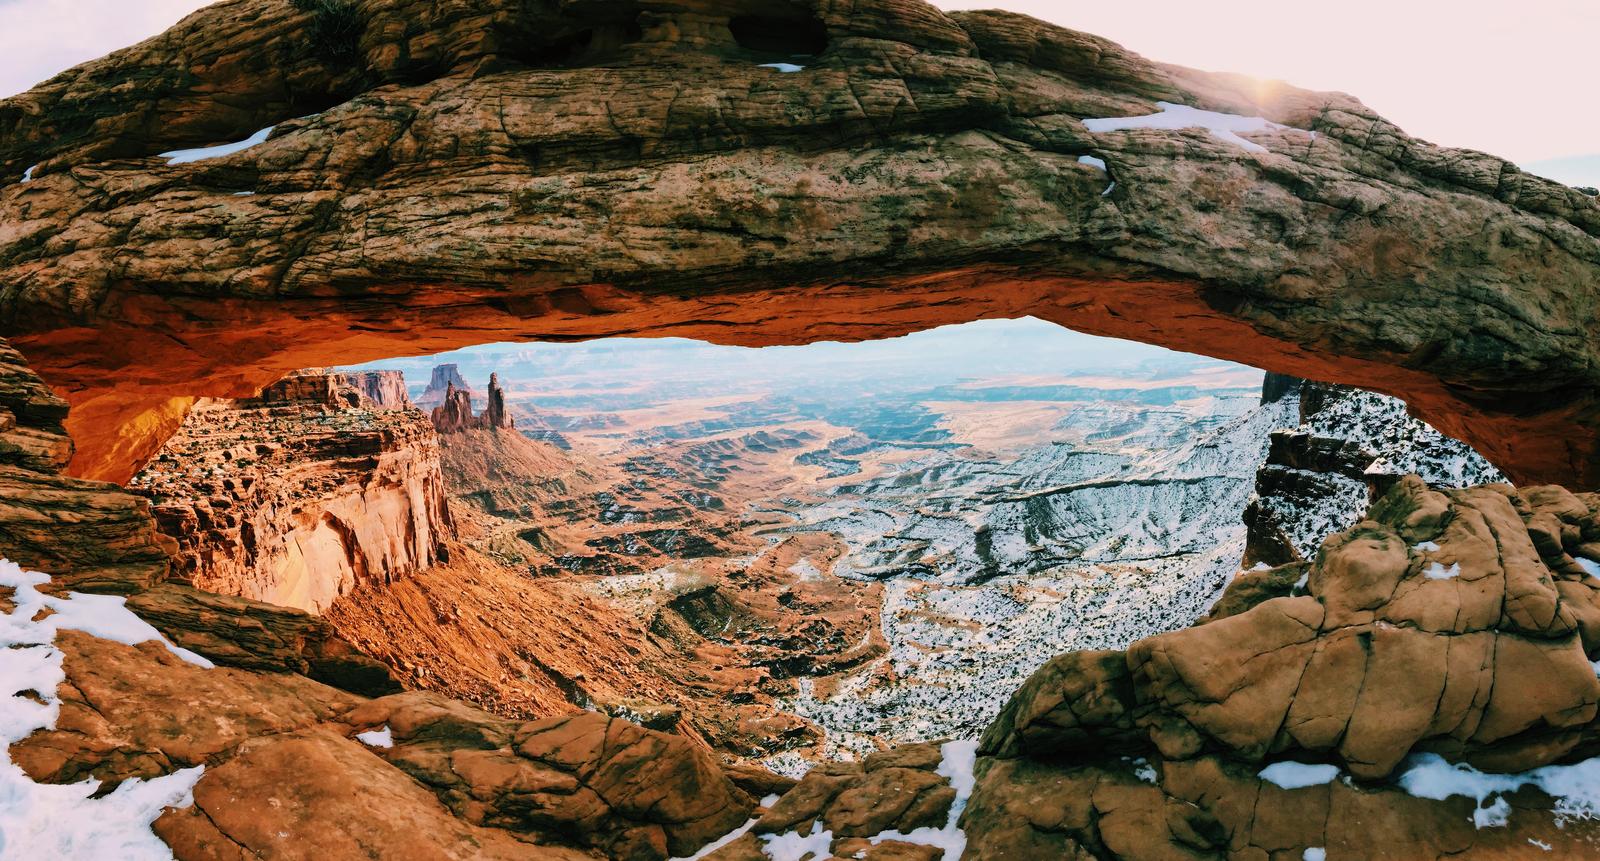 Are You One of the 10% Who Can Get at Least 18 on This 24-Question Geography Quiz? Canyonlands National Park, Utah